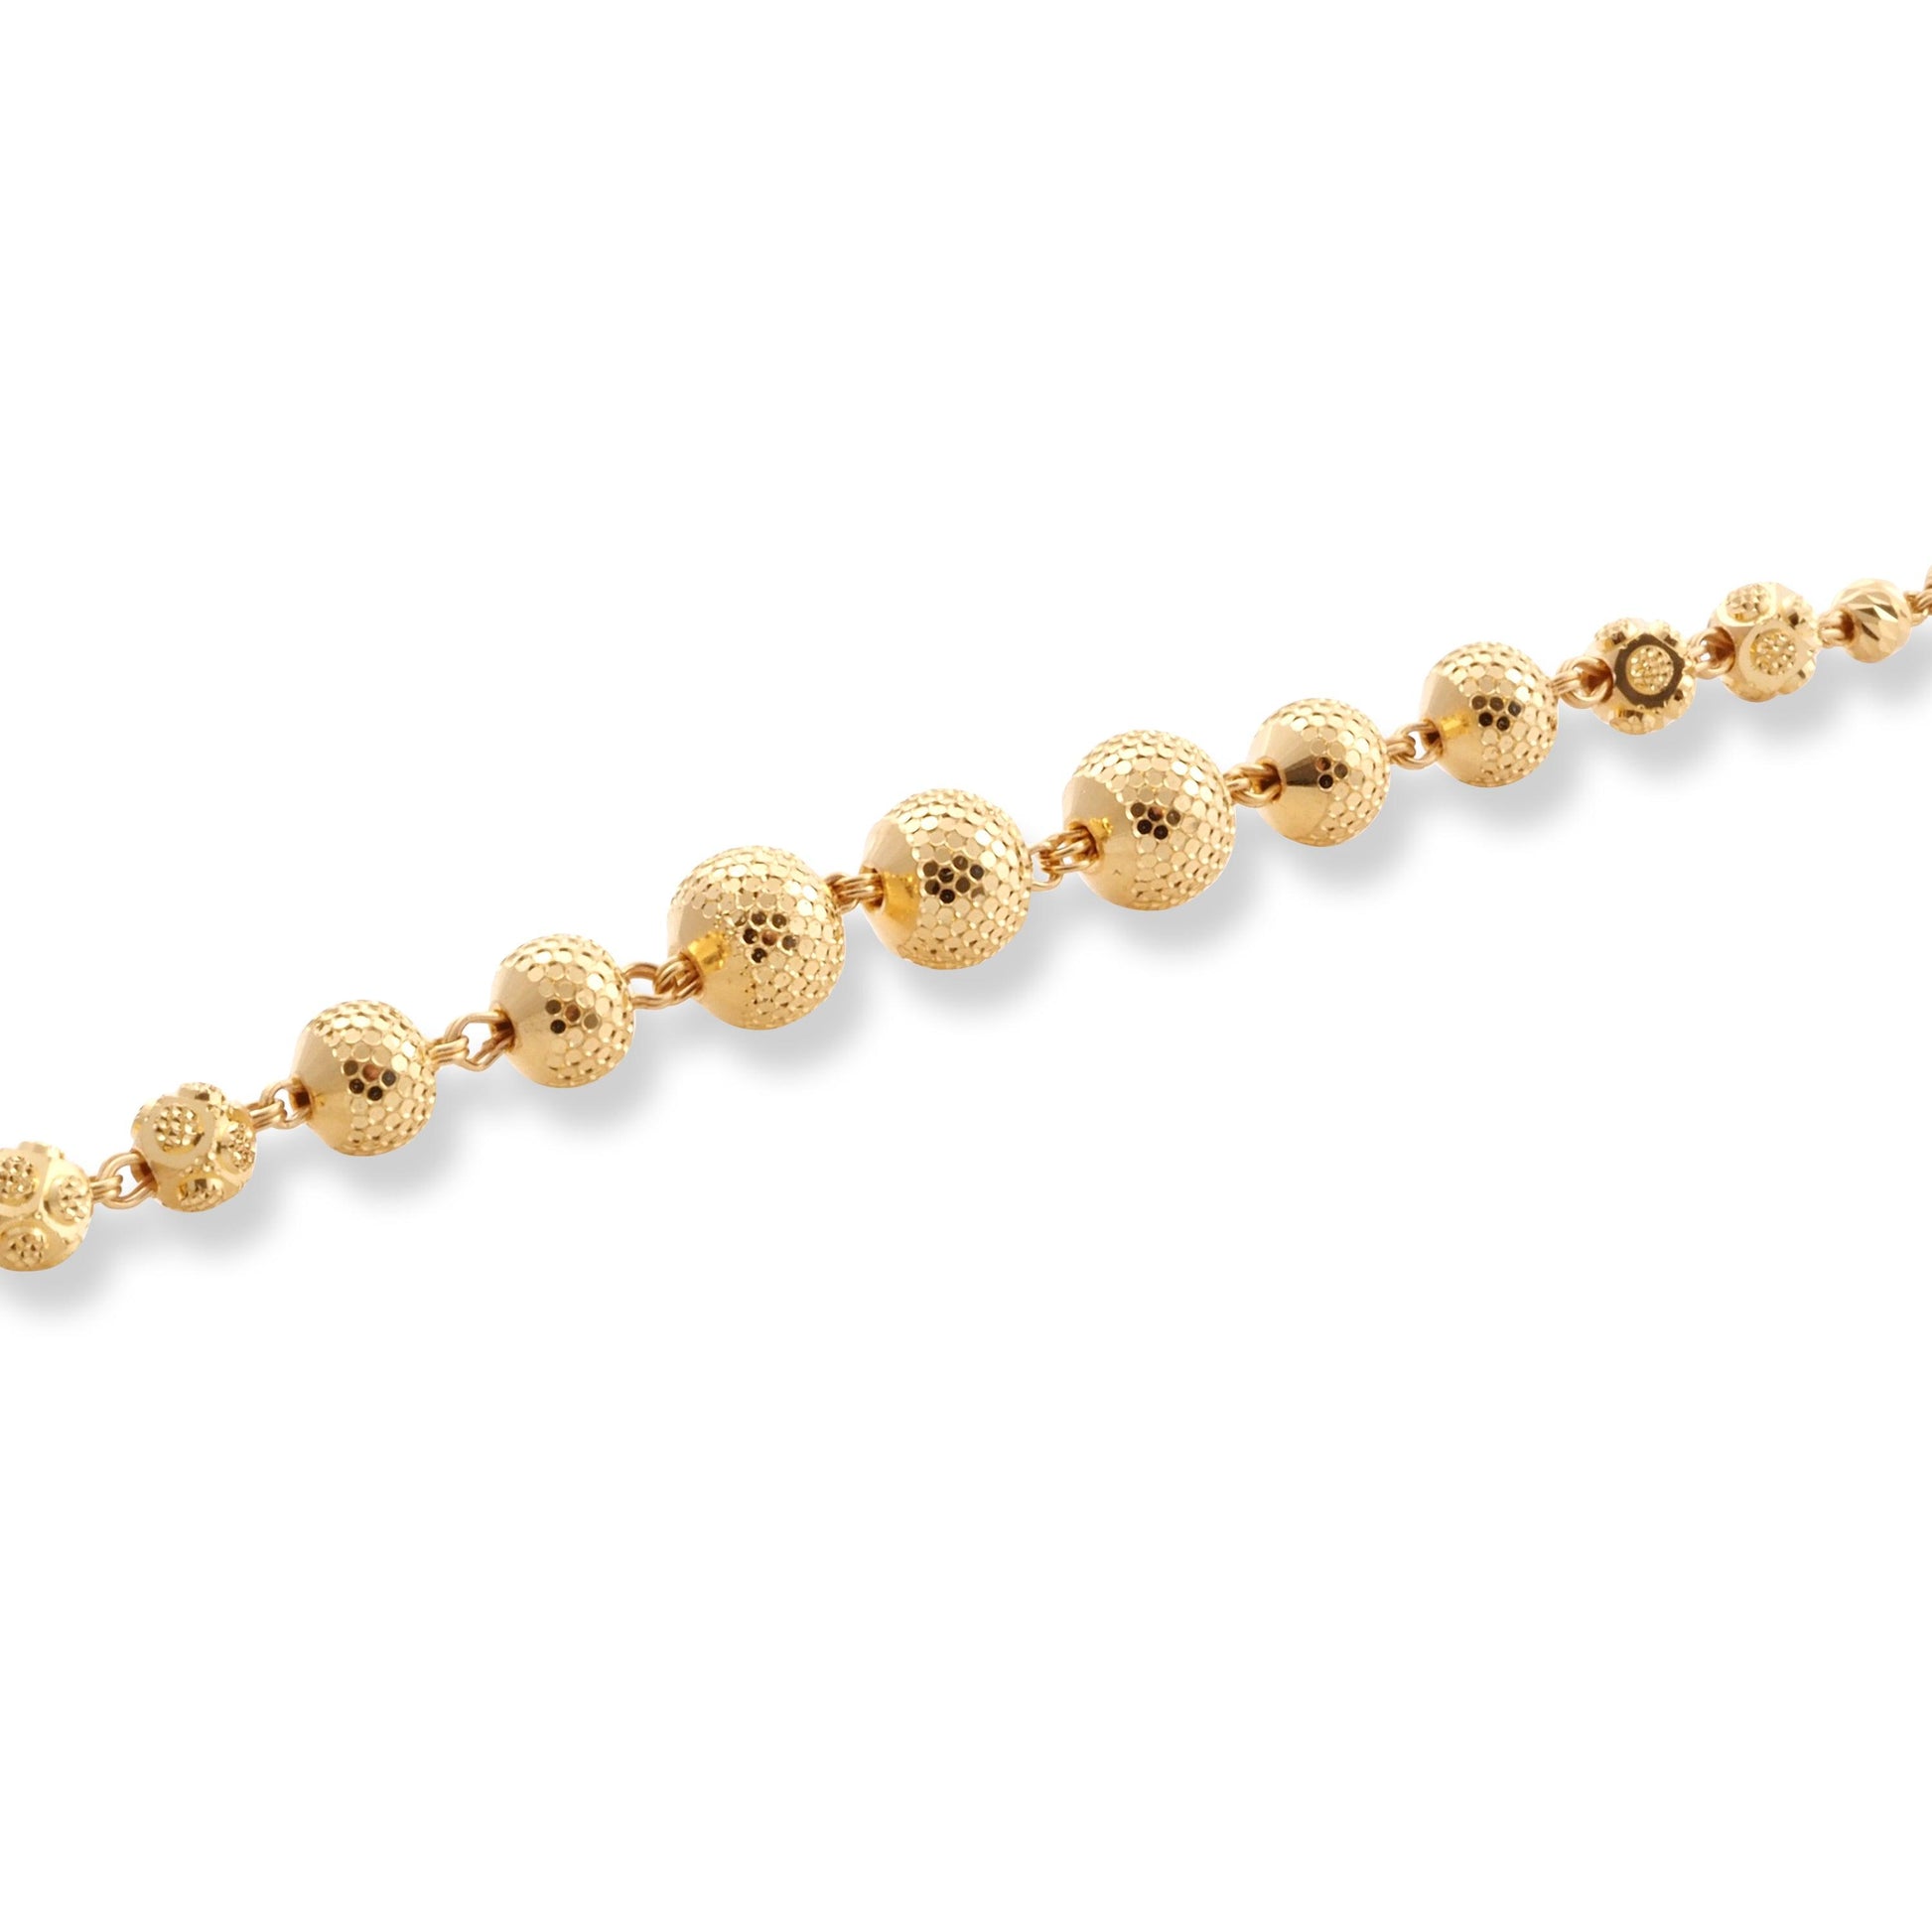 22ct Gold Bracelet with Diamond Cut Beads and Lobster Claw LBR-8510 - Minar Jewellers